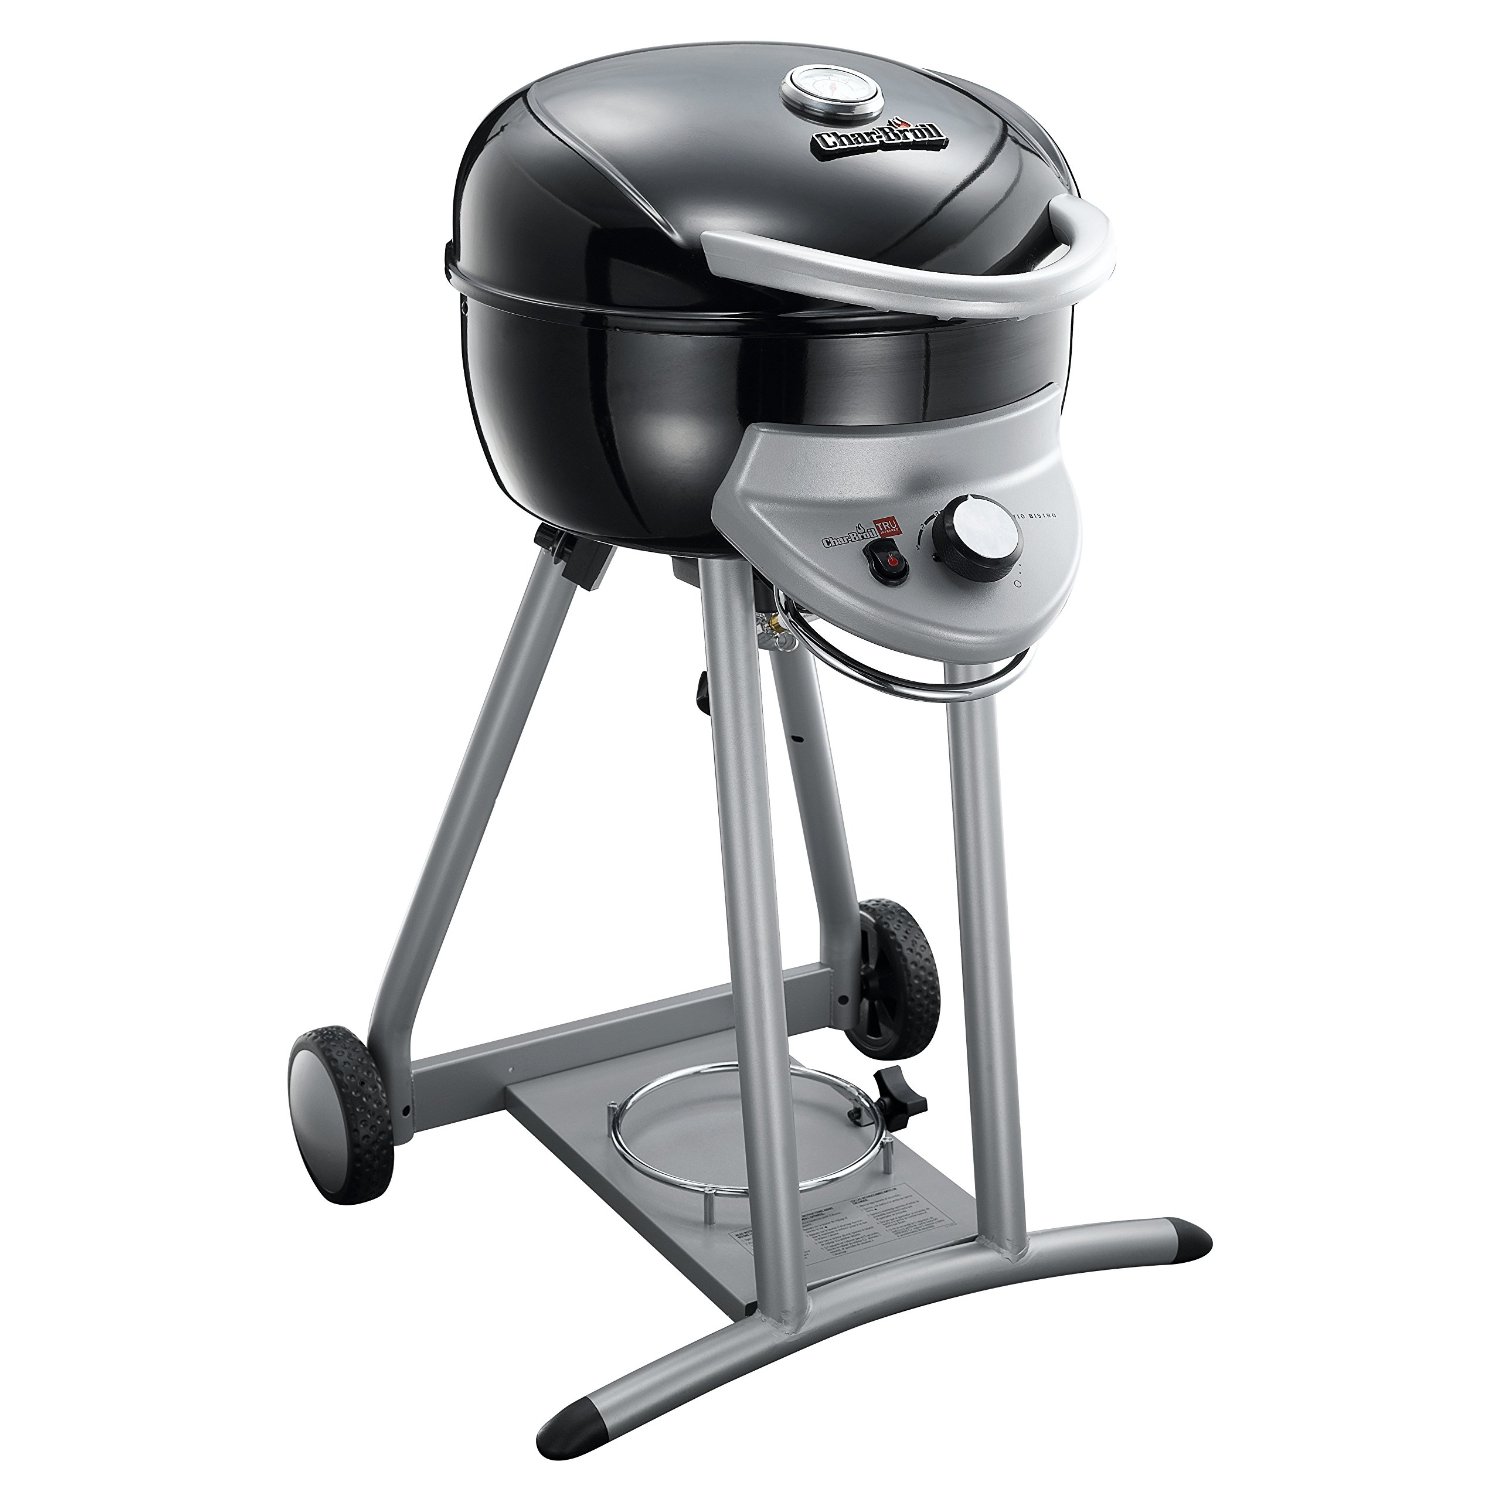 Charbroil Char-Broil TRU-Infrared Patio Bistro Gas Grill, Black